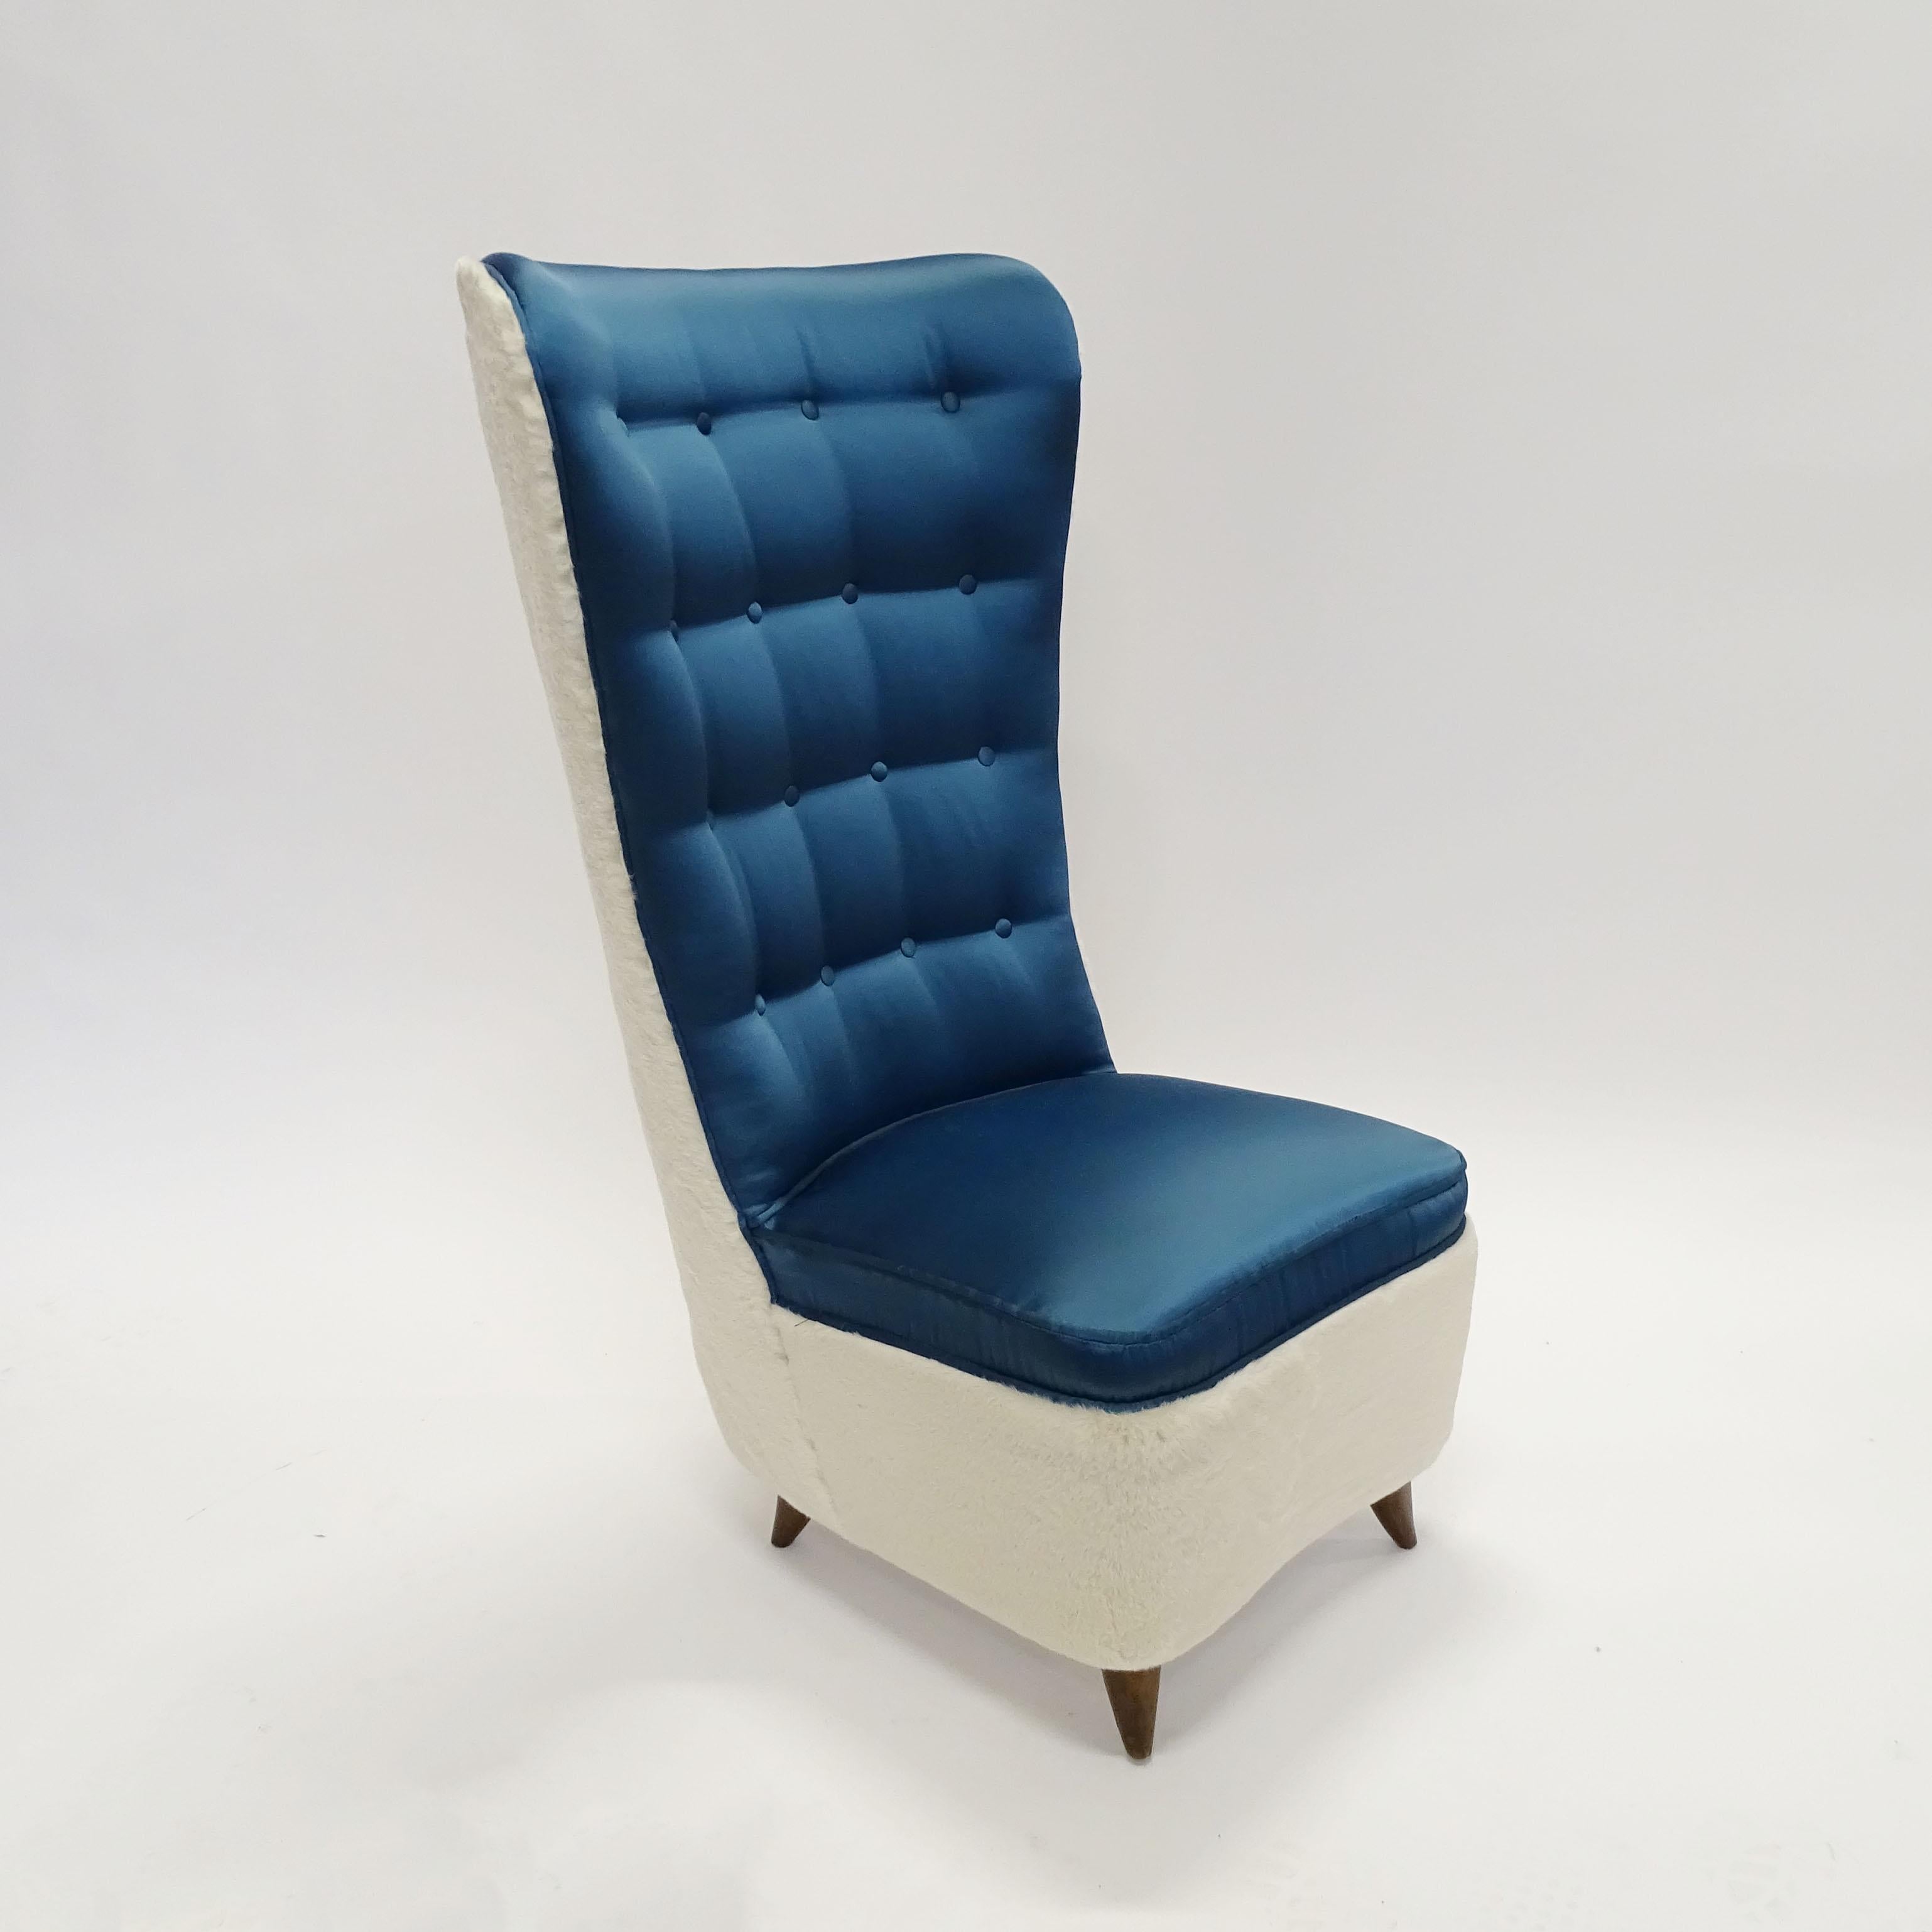 Splendid and rare Cesare Lacca slipper chair in Faux fur and dark blue Satin, manufactured by Casa and Giardino, the famed Interiors store owned by Fede Cheti.
Italy 1950s
Reference : Aloi _ Sedie Poltrone Divani 1950 image 165.